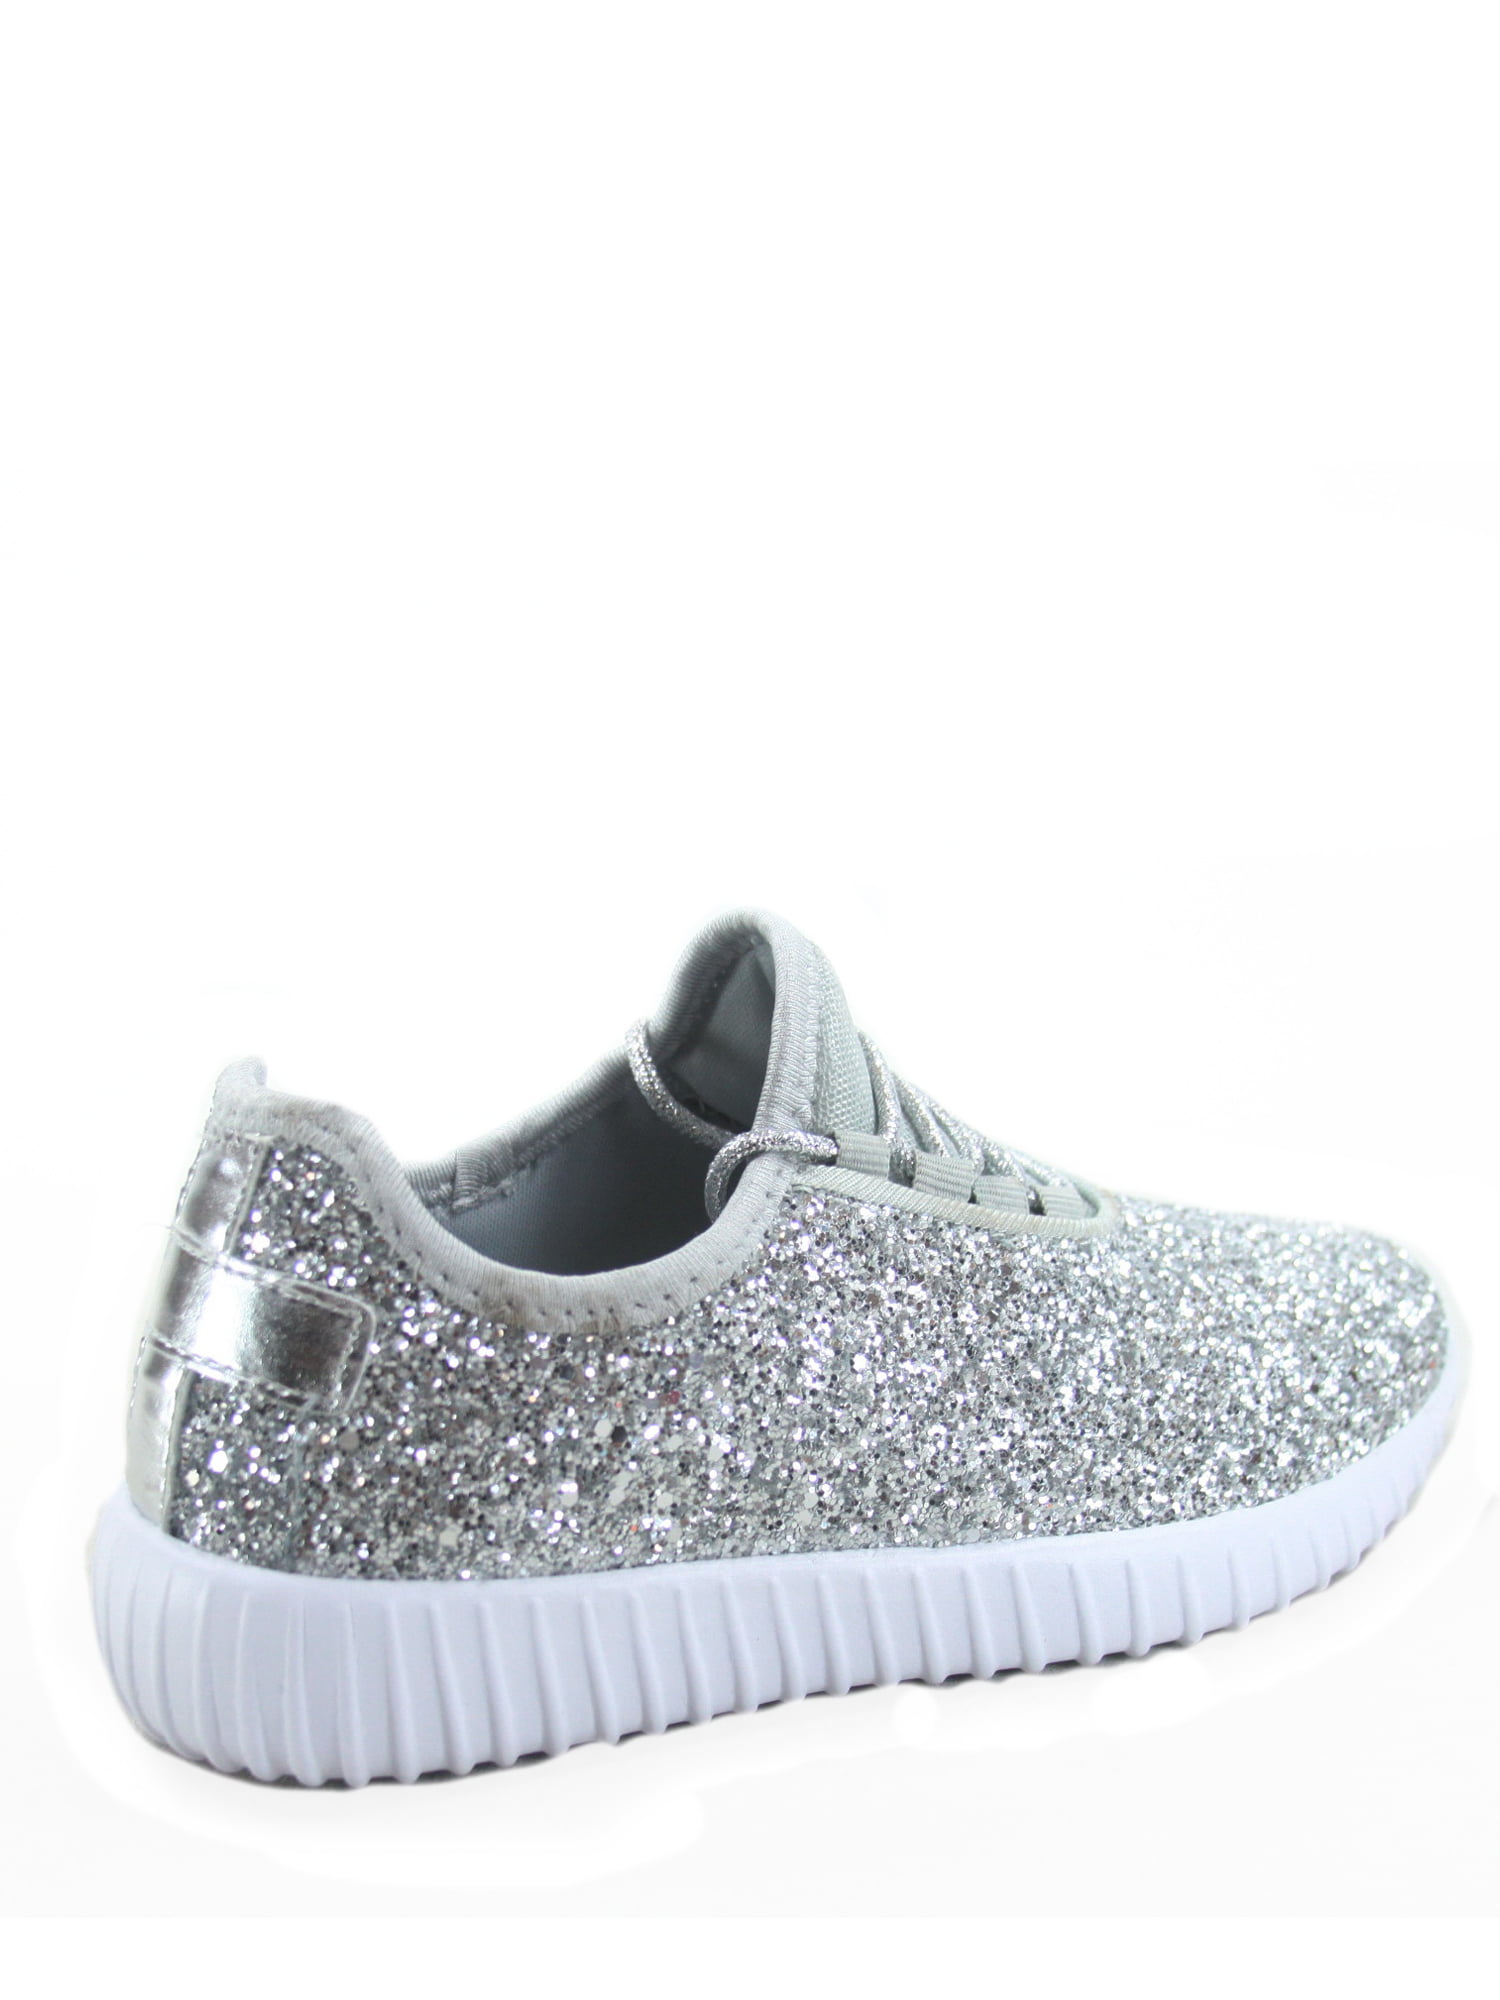 REMY-18 Sparkly Fashion Sneakers Shoes for Women! – Diosas Shoes